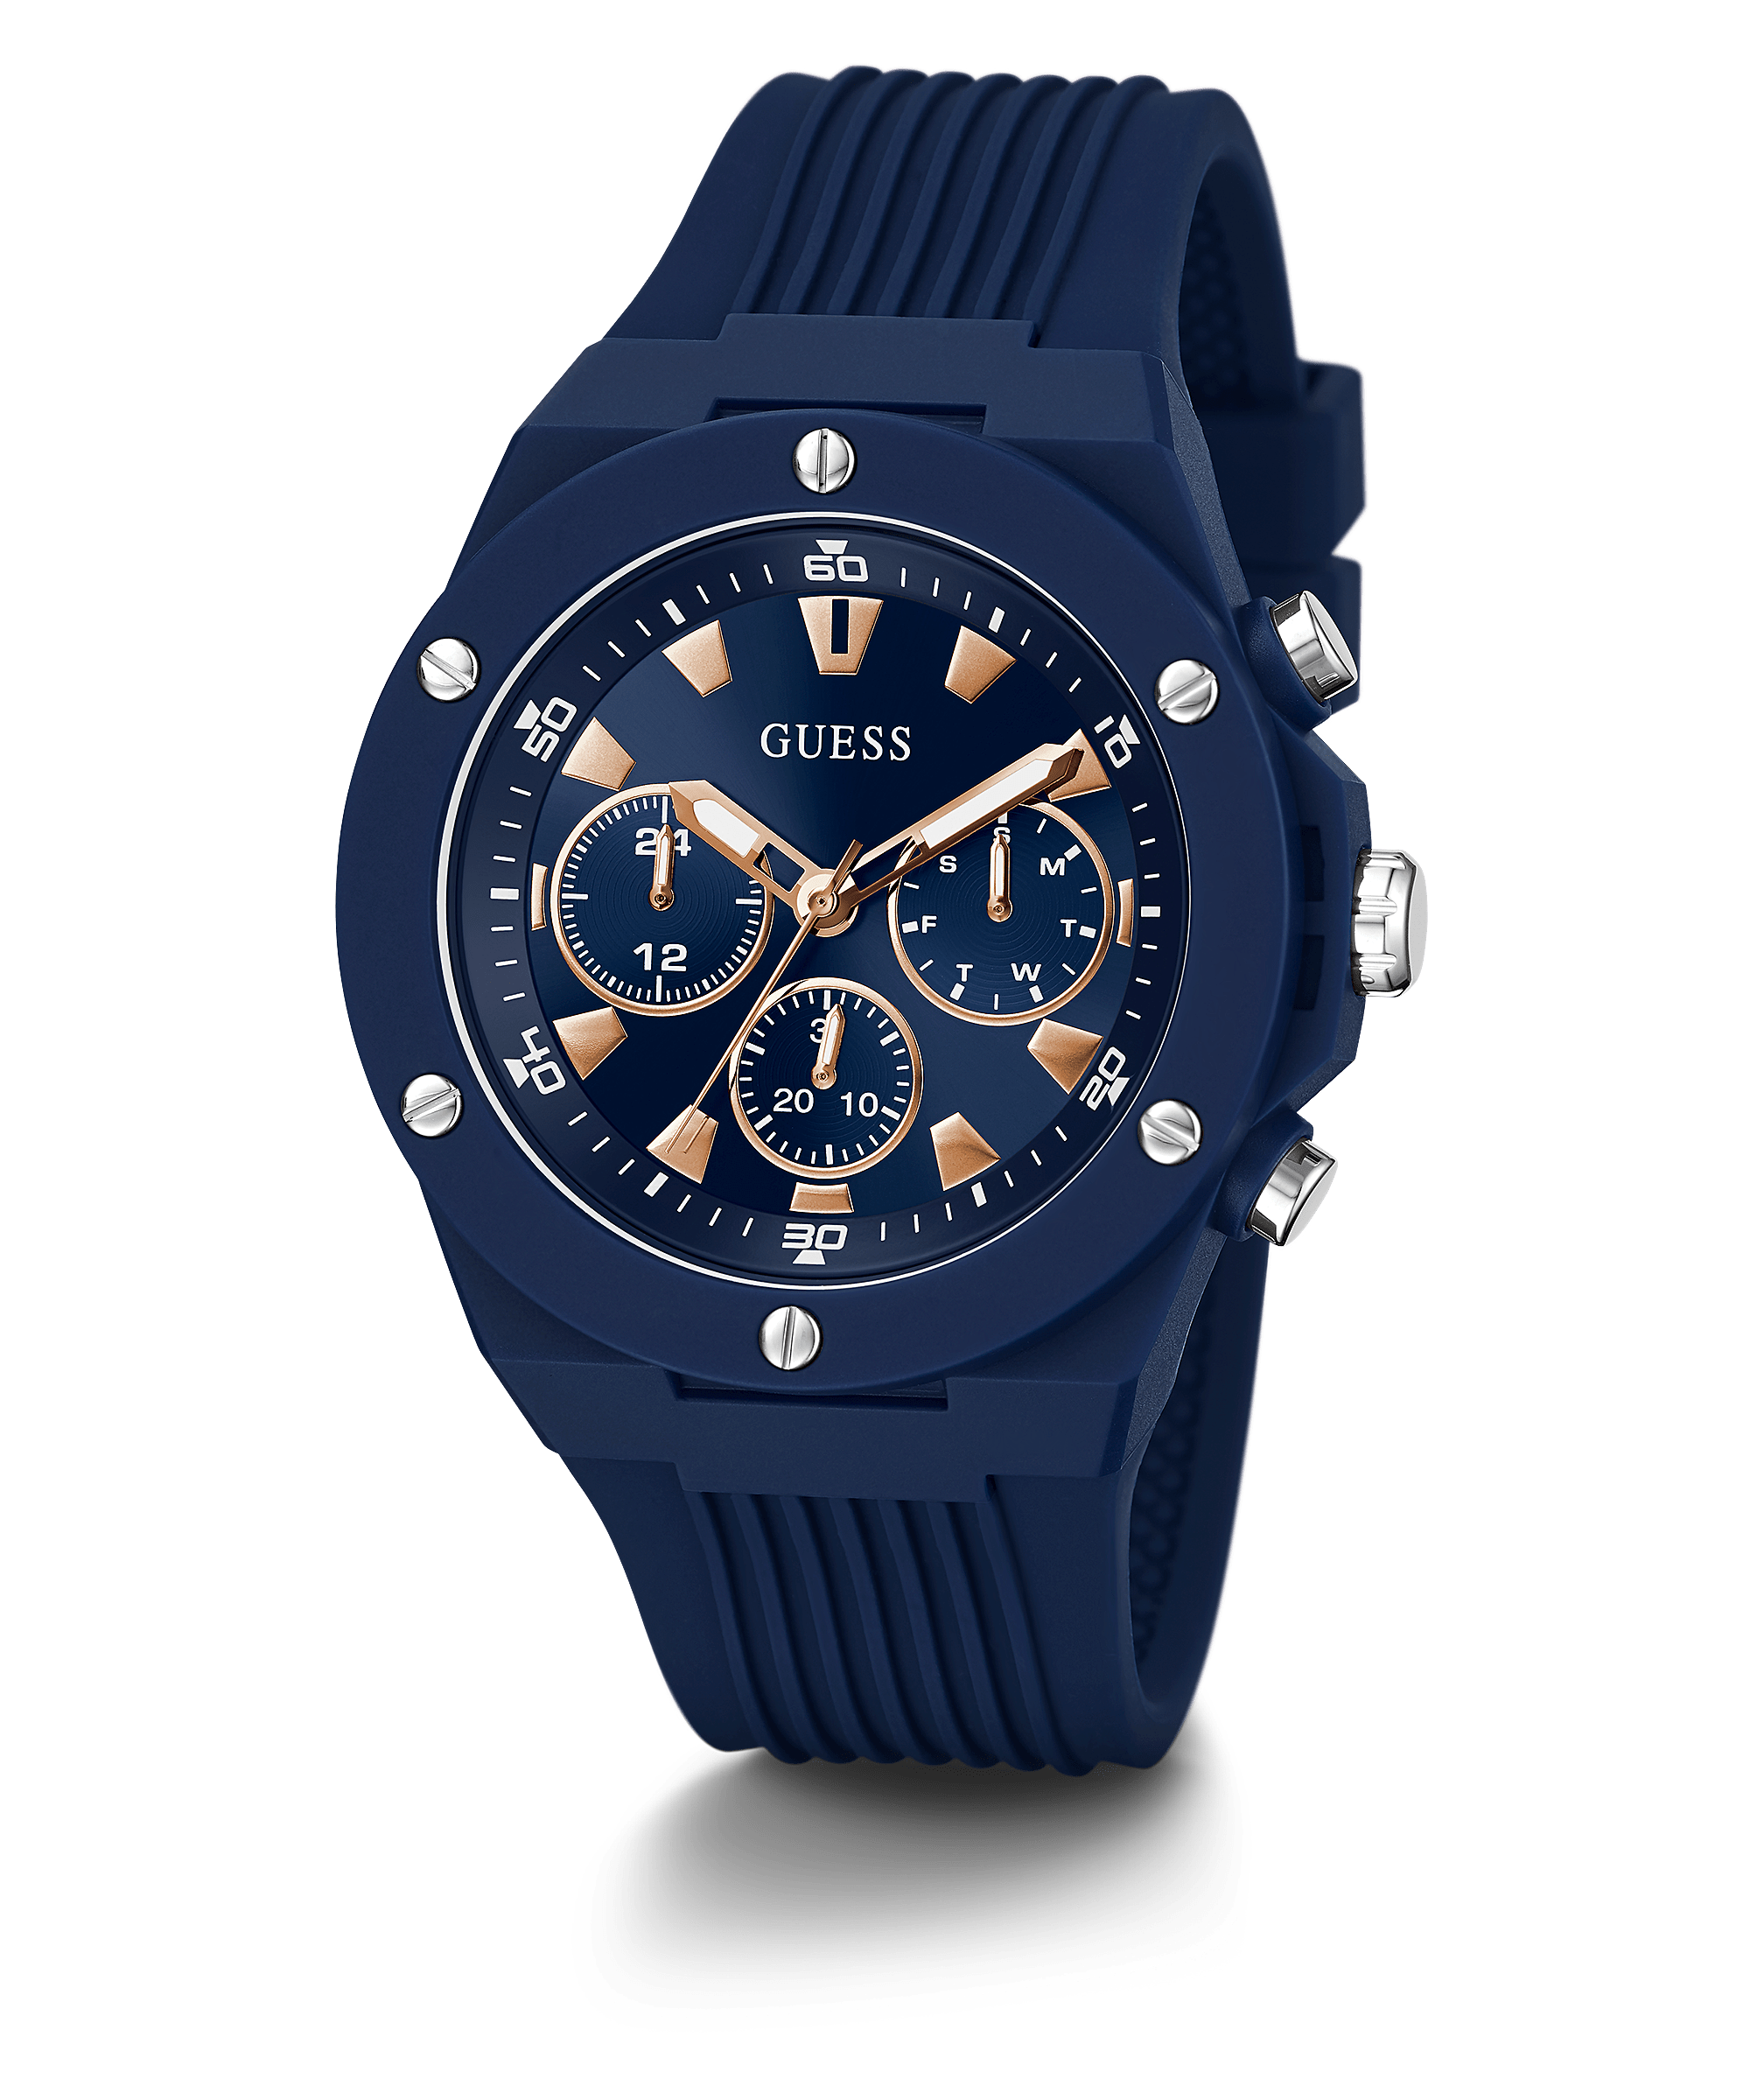 Mens 46mm Blue Silicone Chrono Watch - GUESS Watches